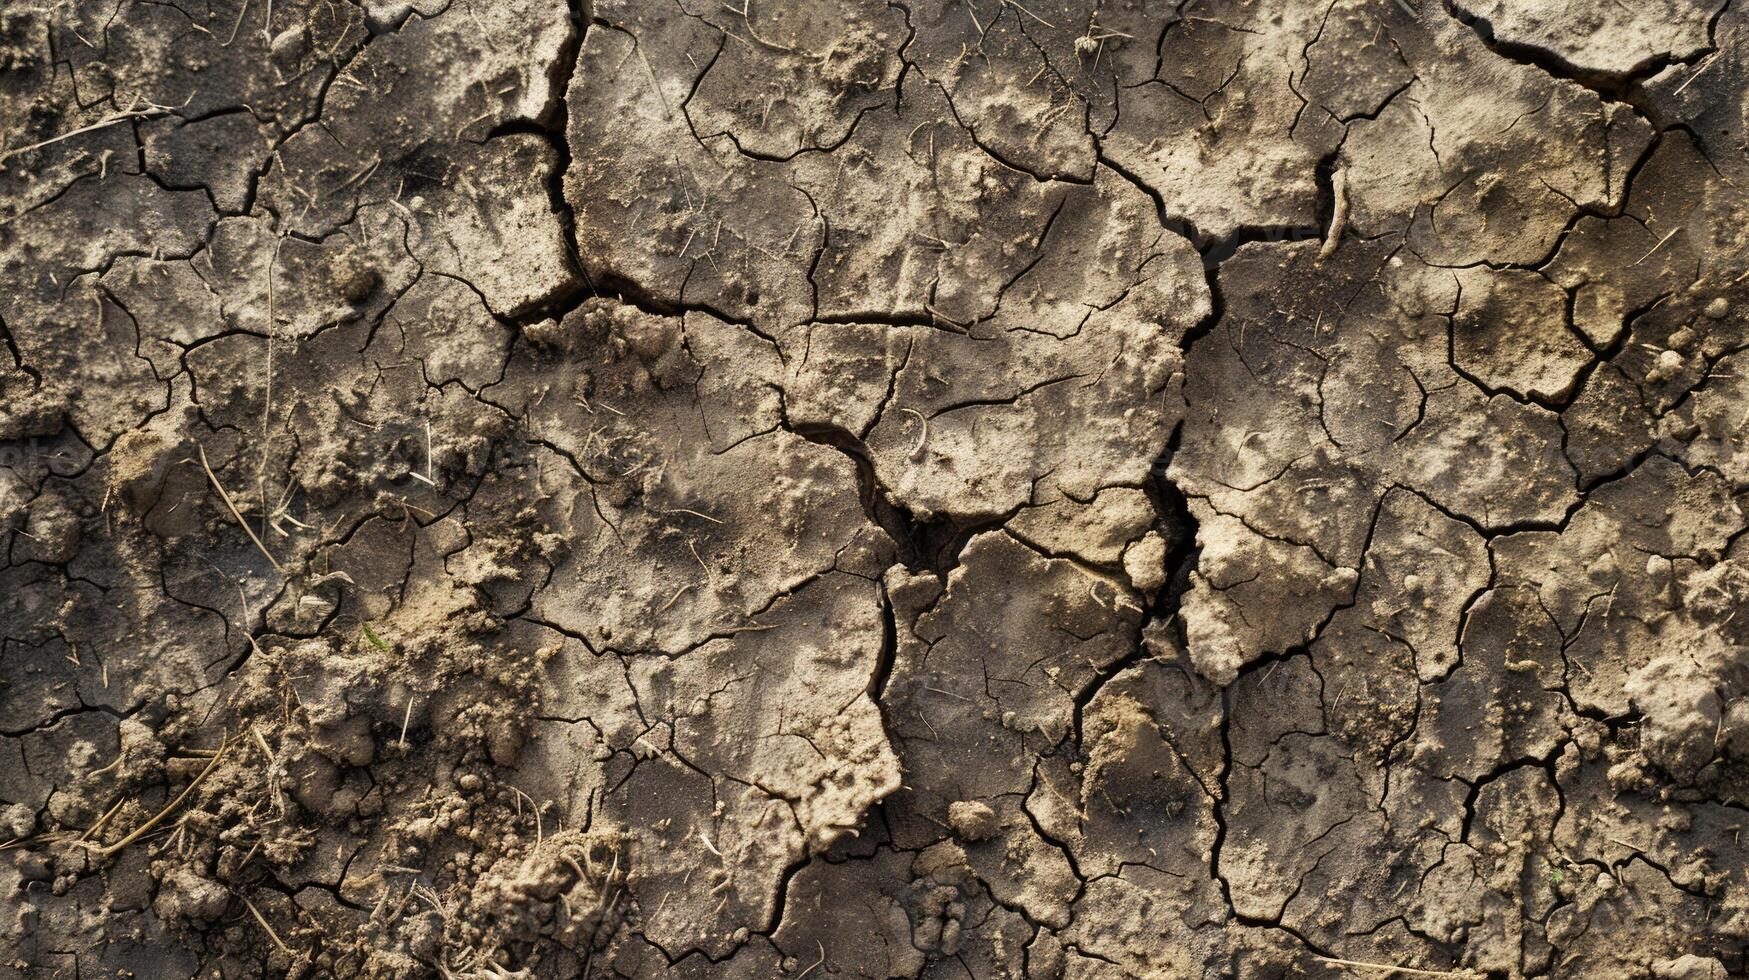 Cracked mud on farmland in central Spain photo